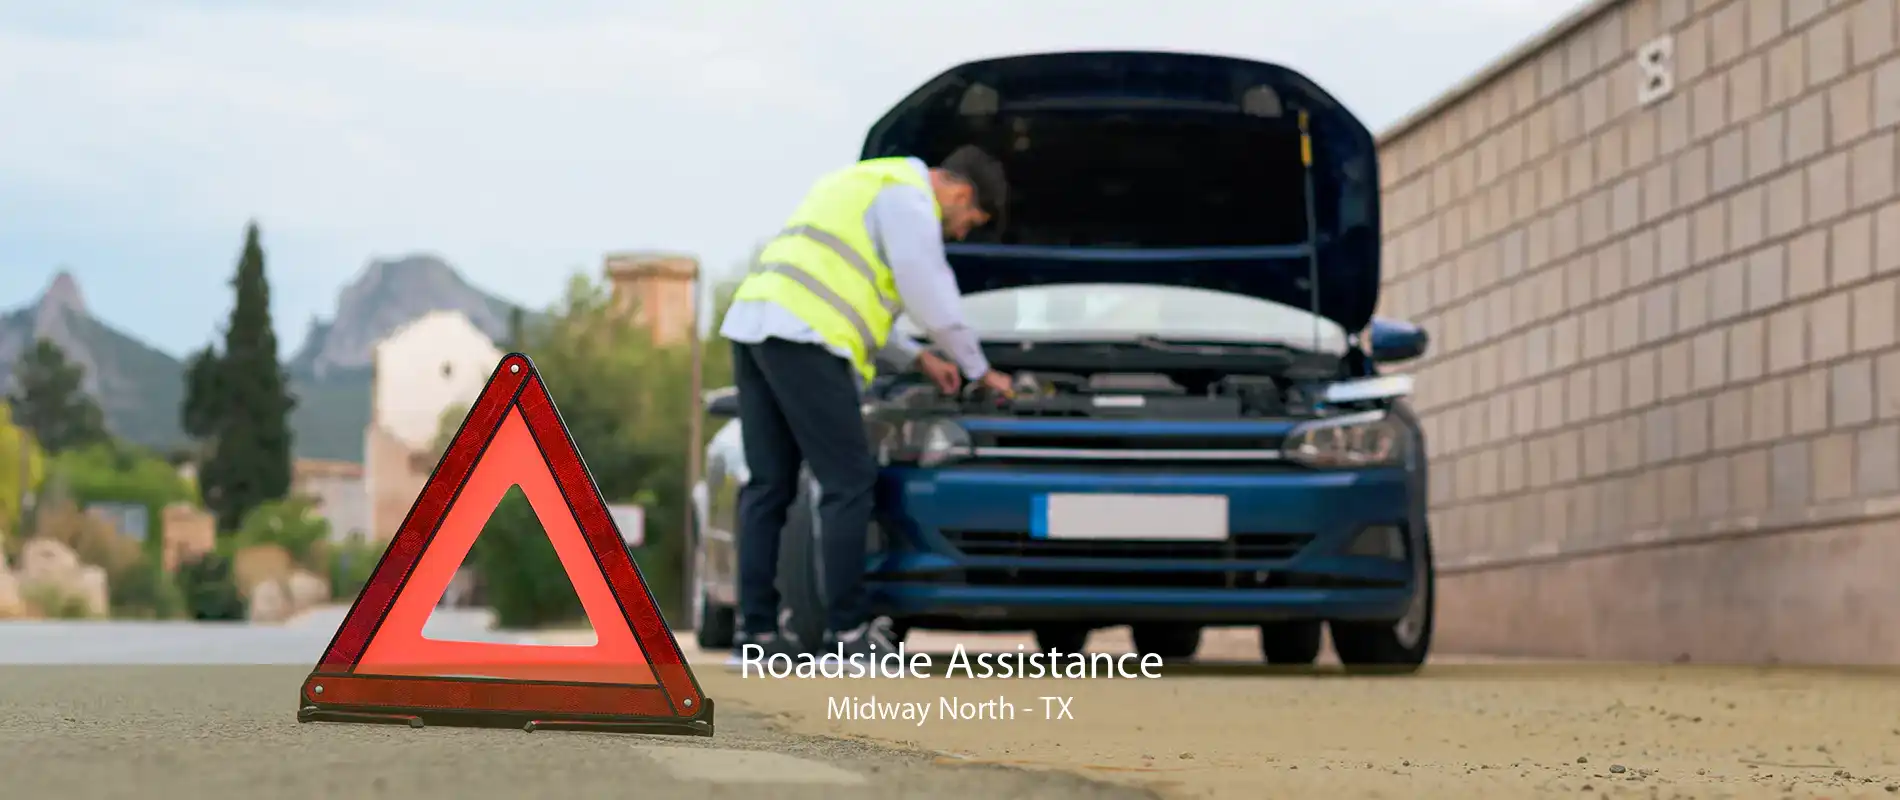 Roadside Assistance Midway North - TX